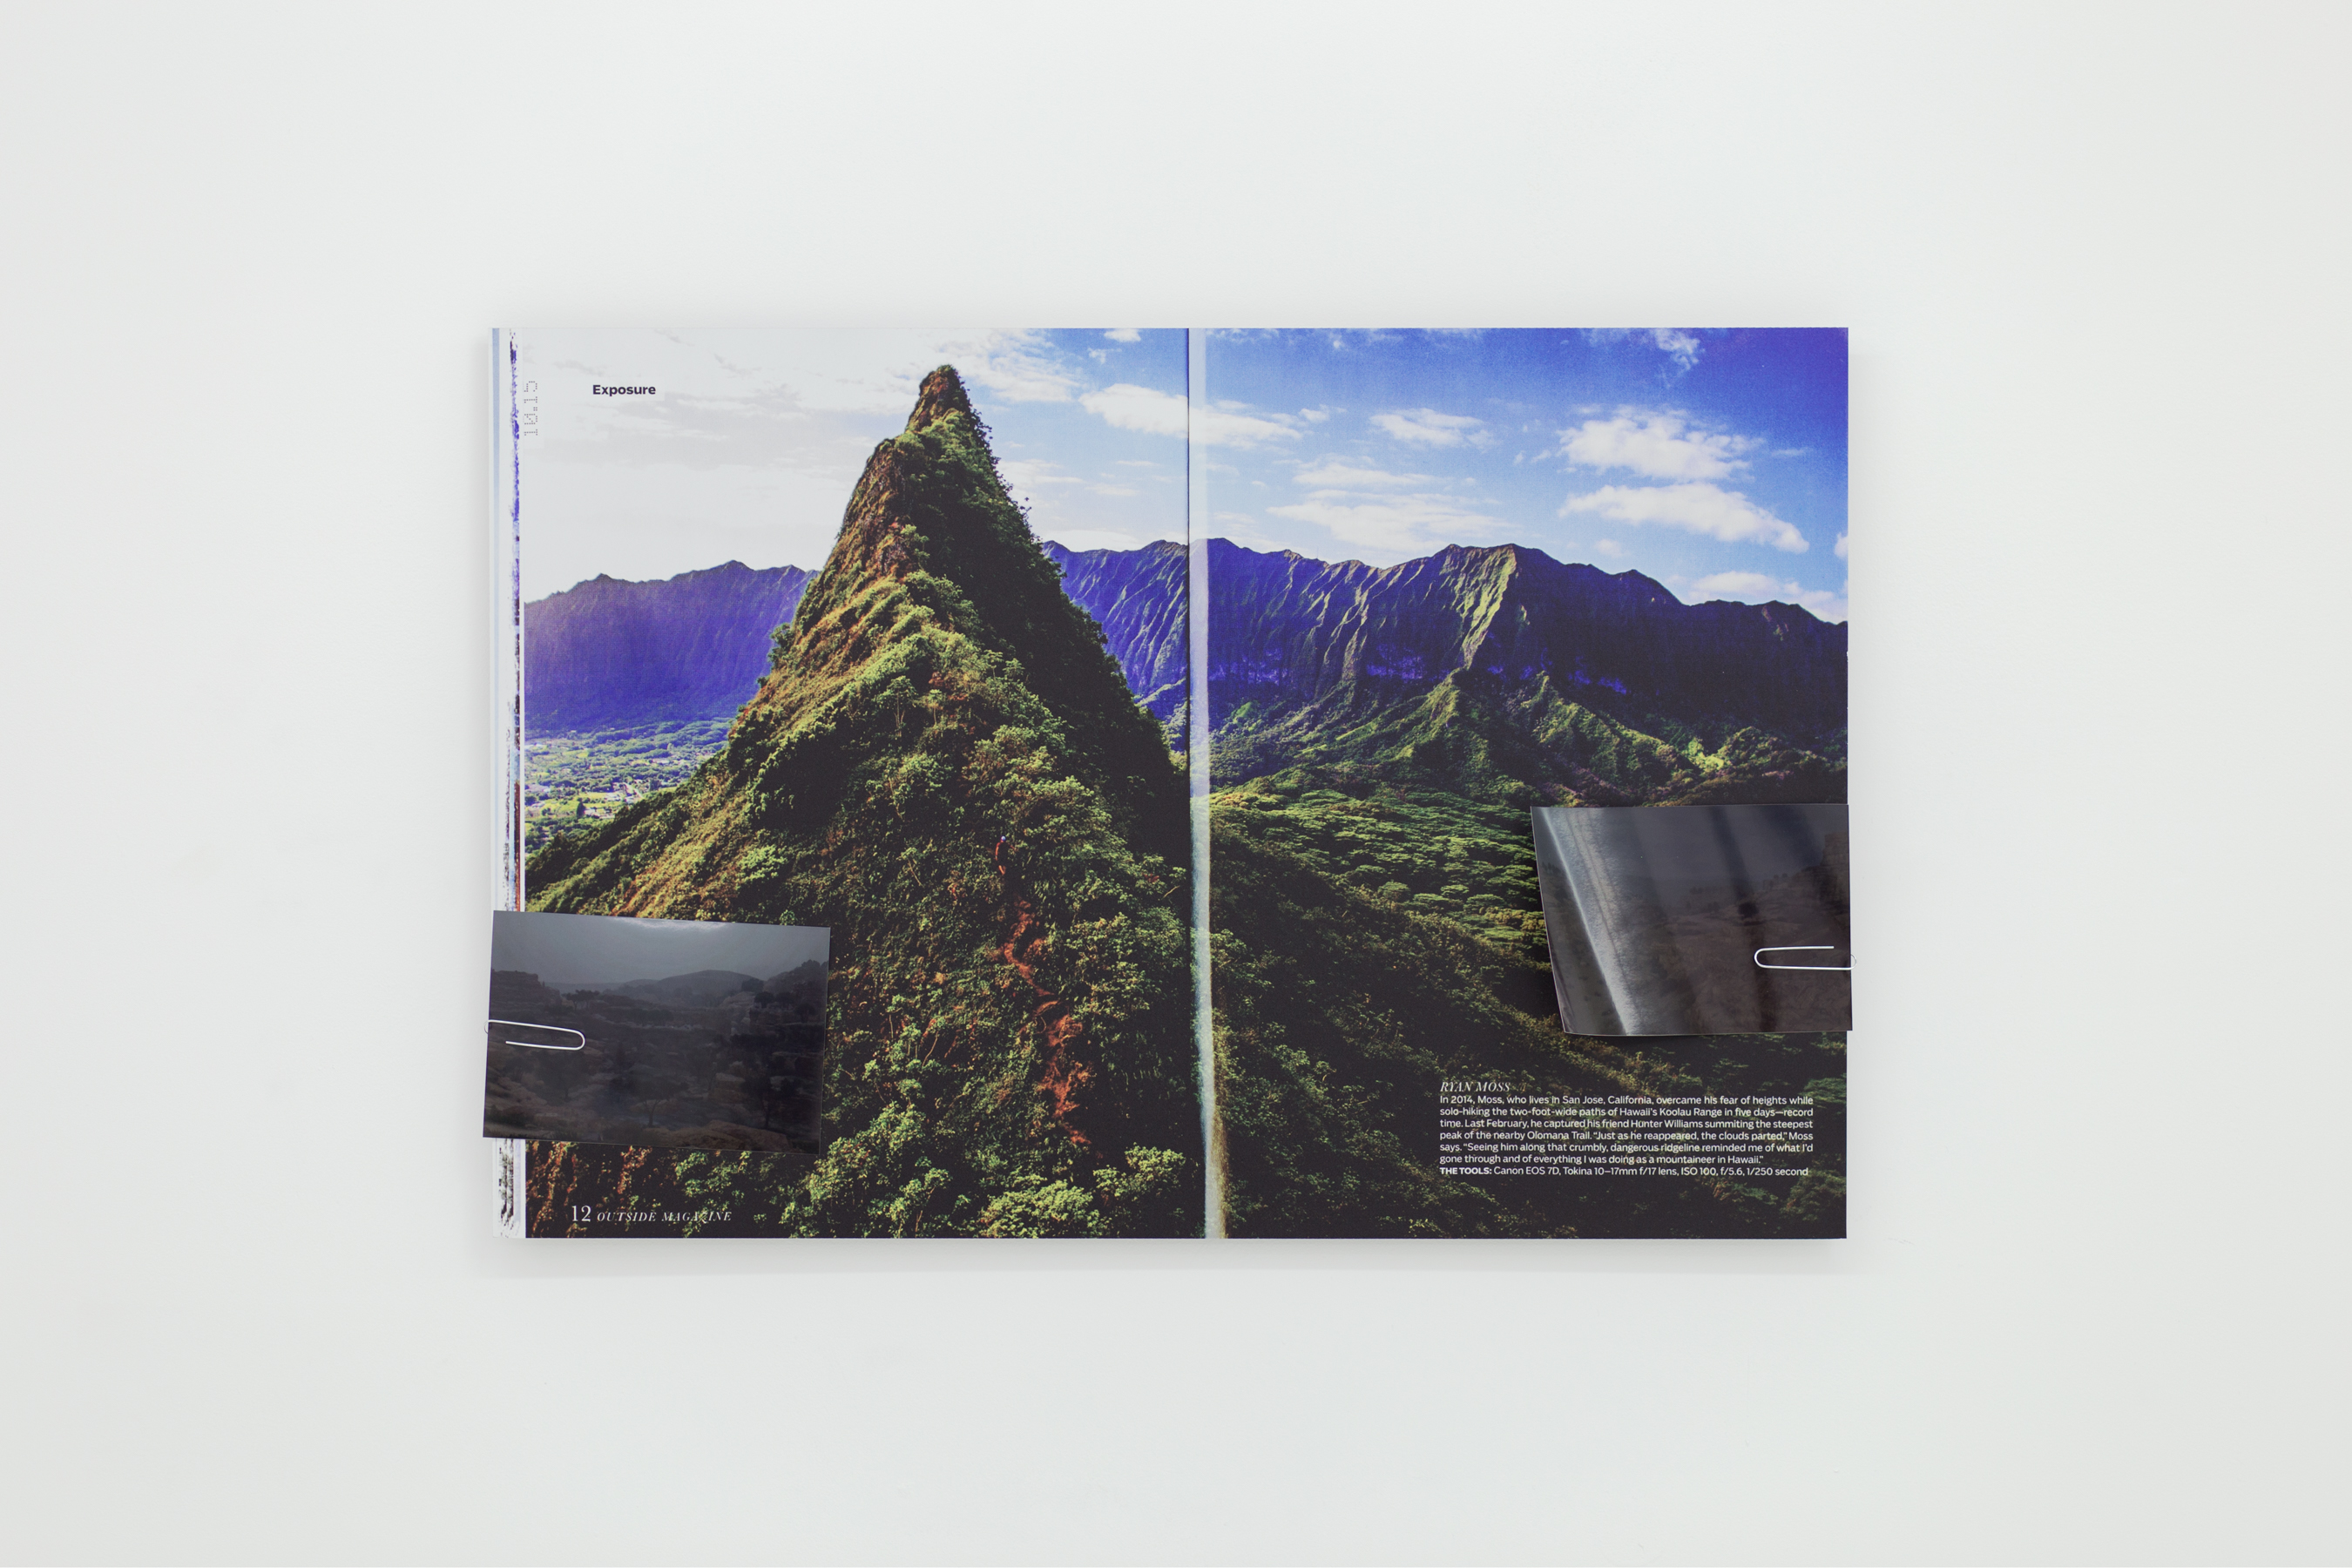 Print of a magazine spread on aluminum depicting a lush mountainside. There are two small photos attached to the print by paperclips